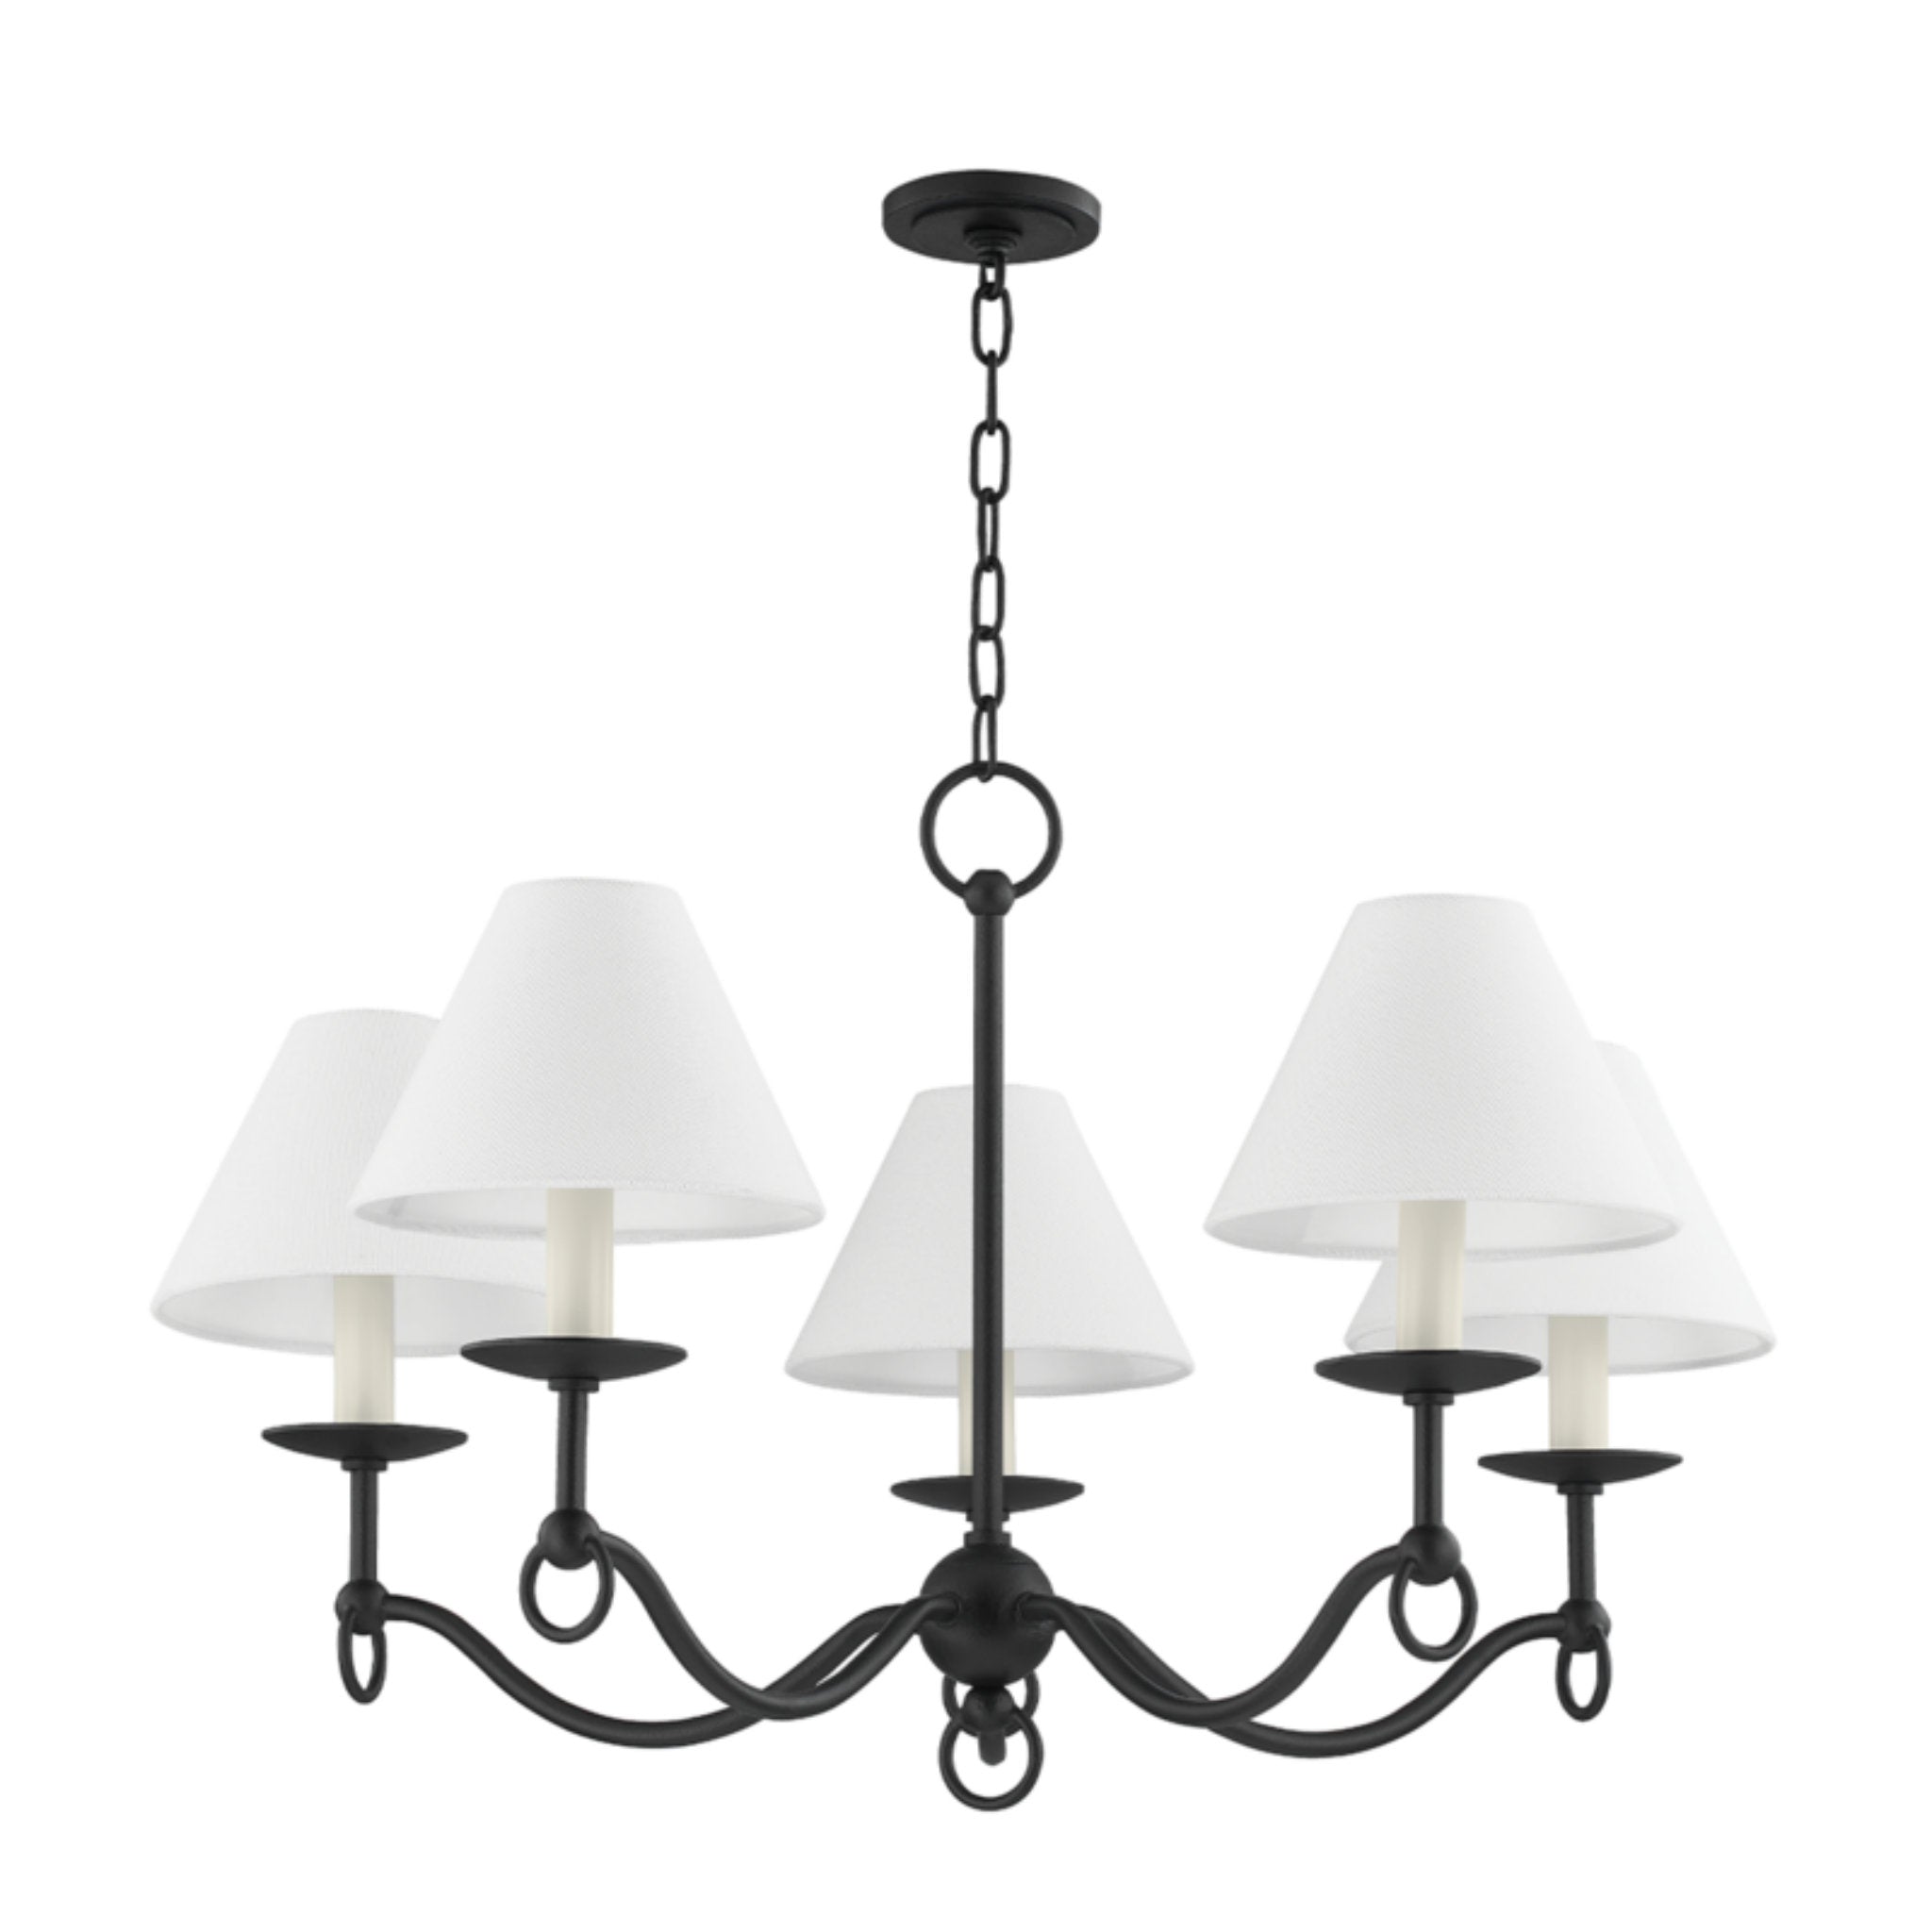 Massi 5 Light Chandelier in Forged Iron